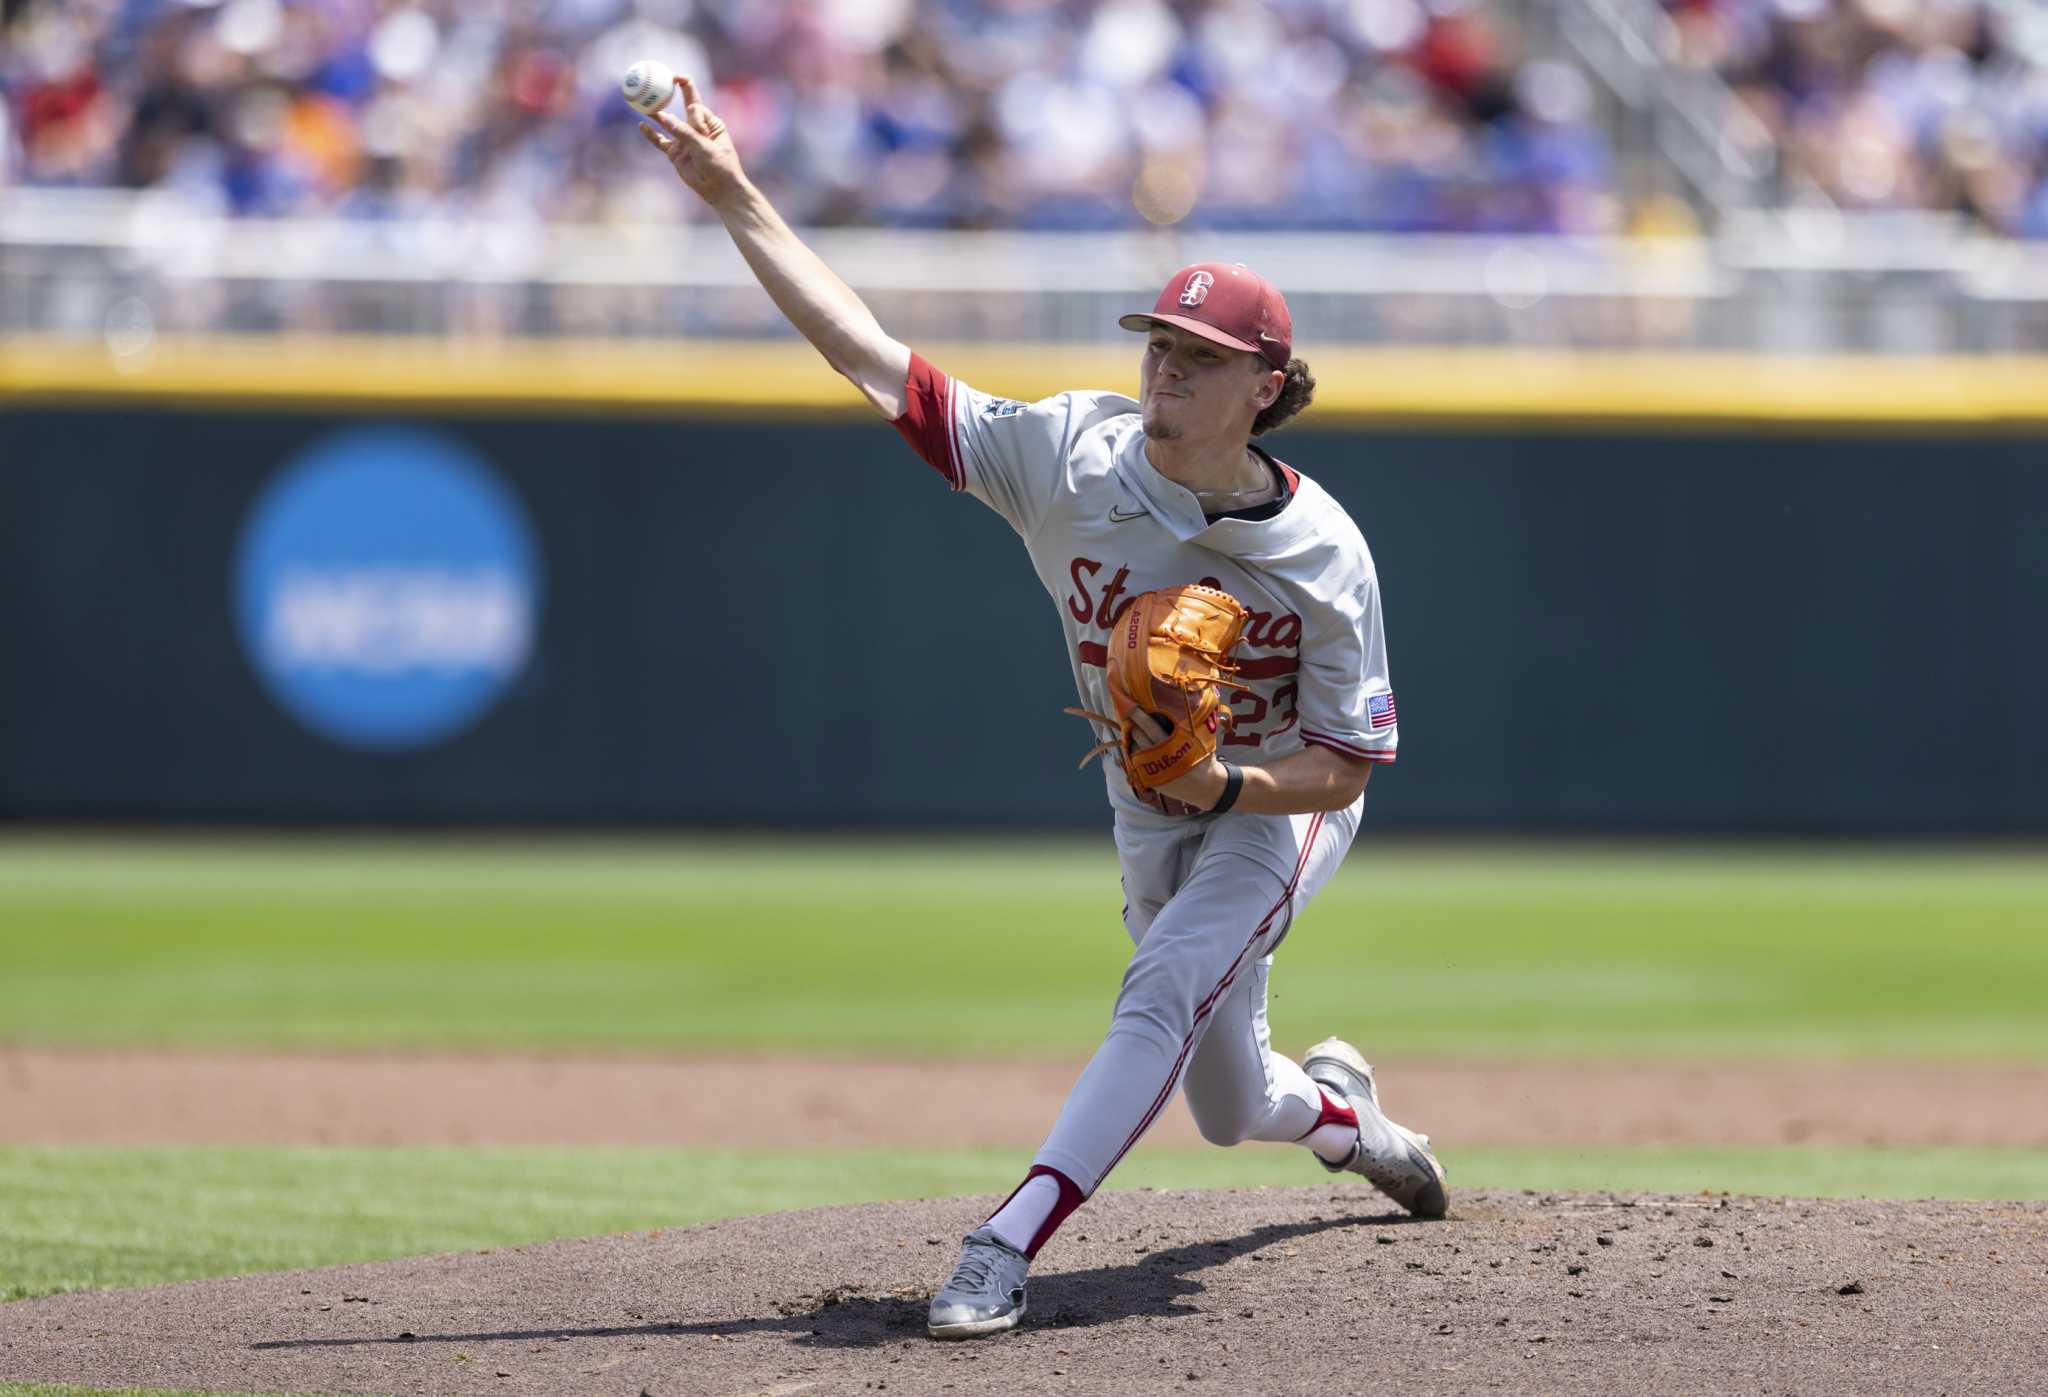 Top 10 high school players to watch for 2015 MLB Draft